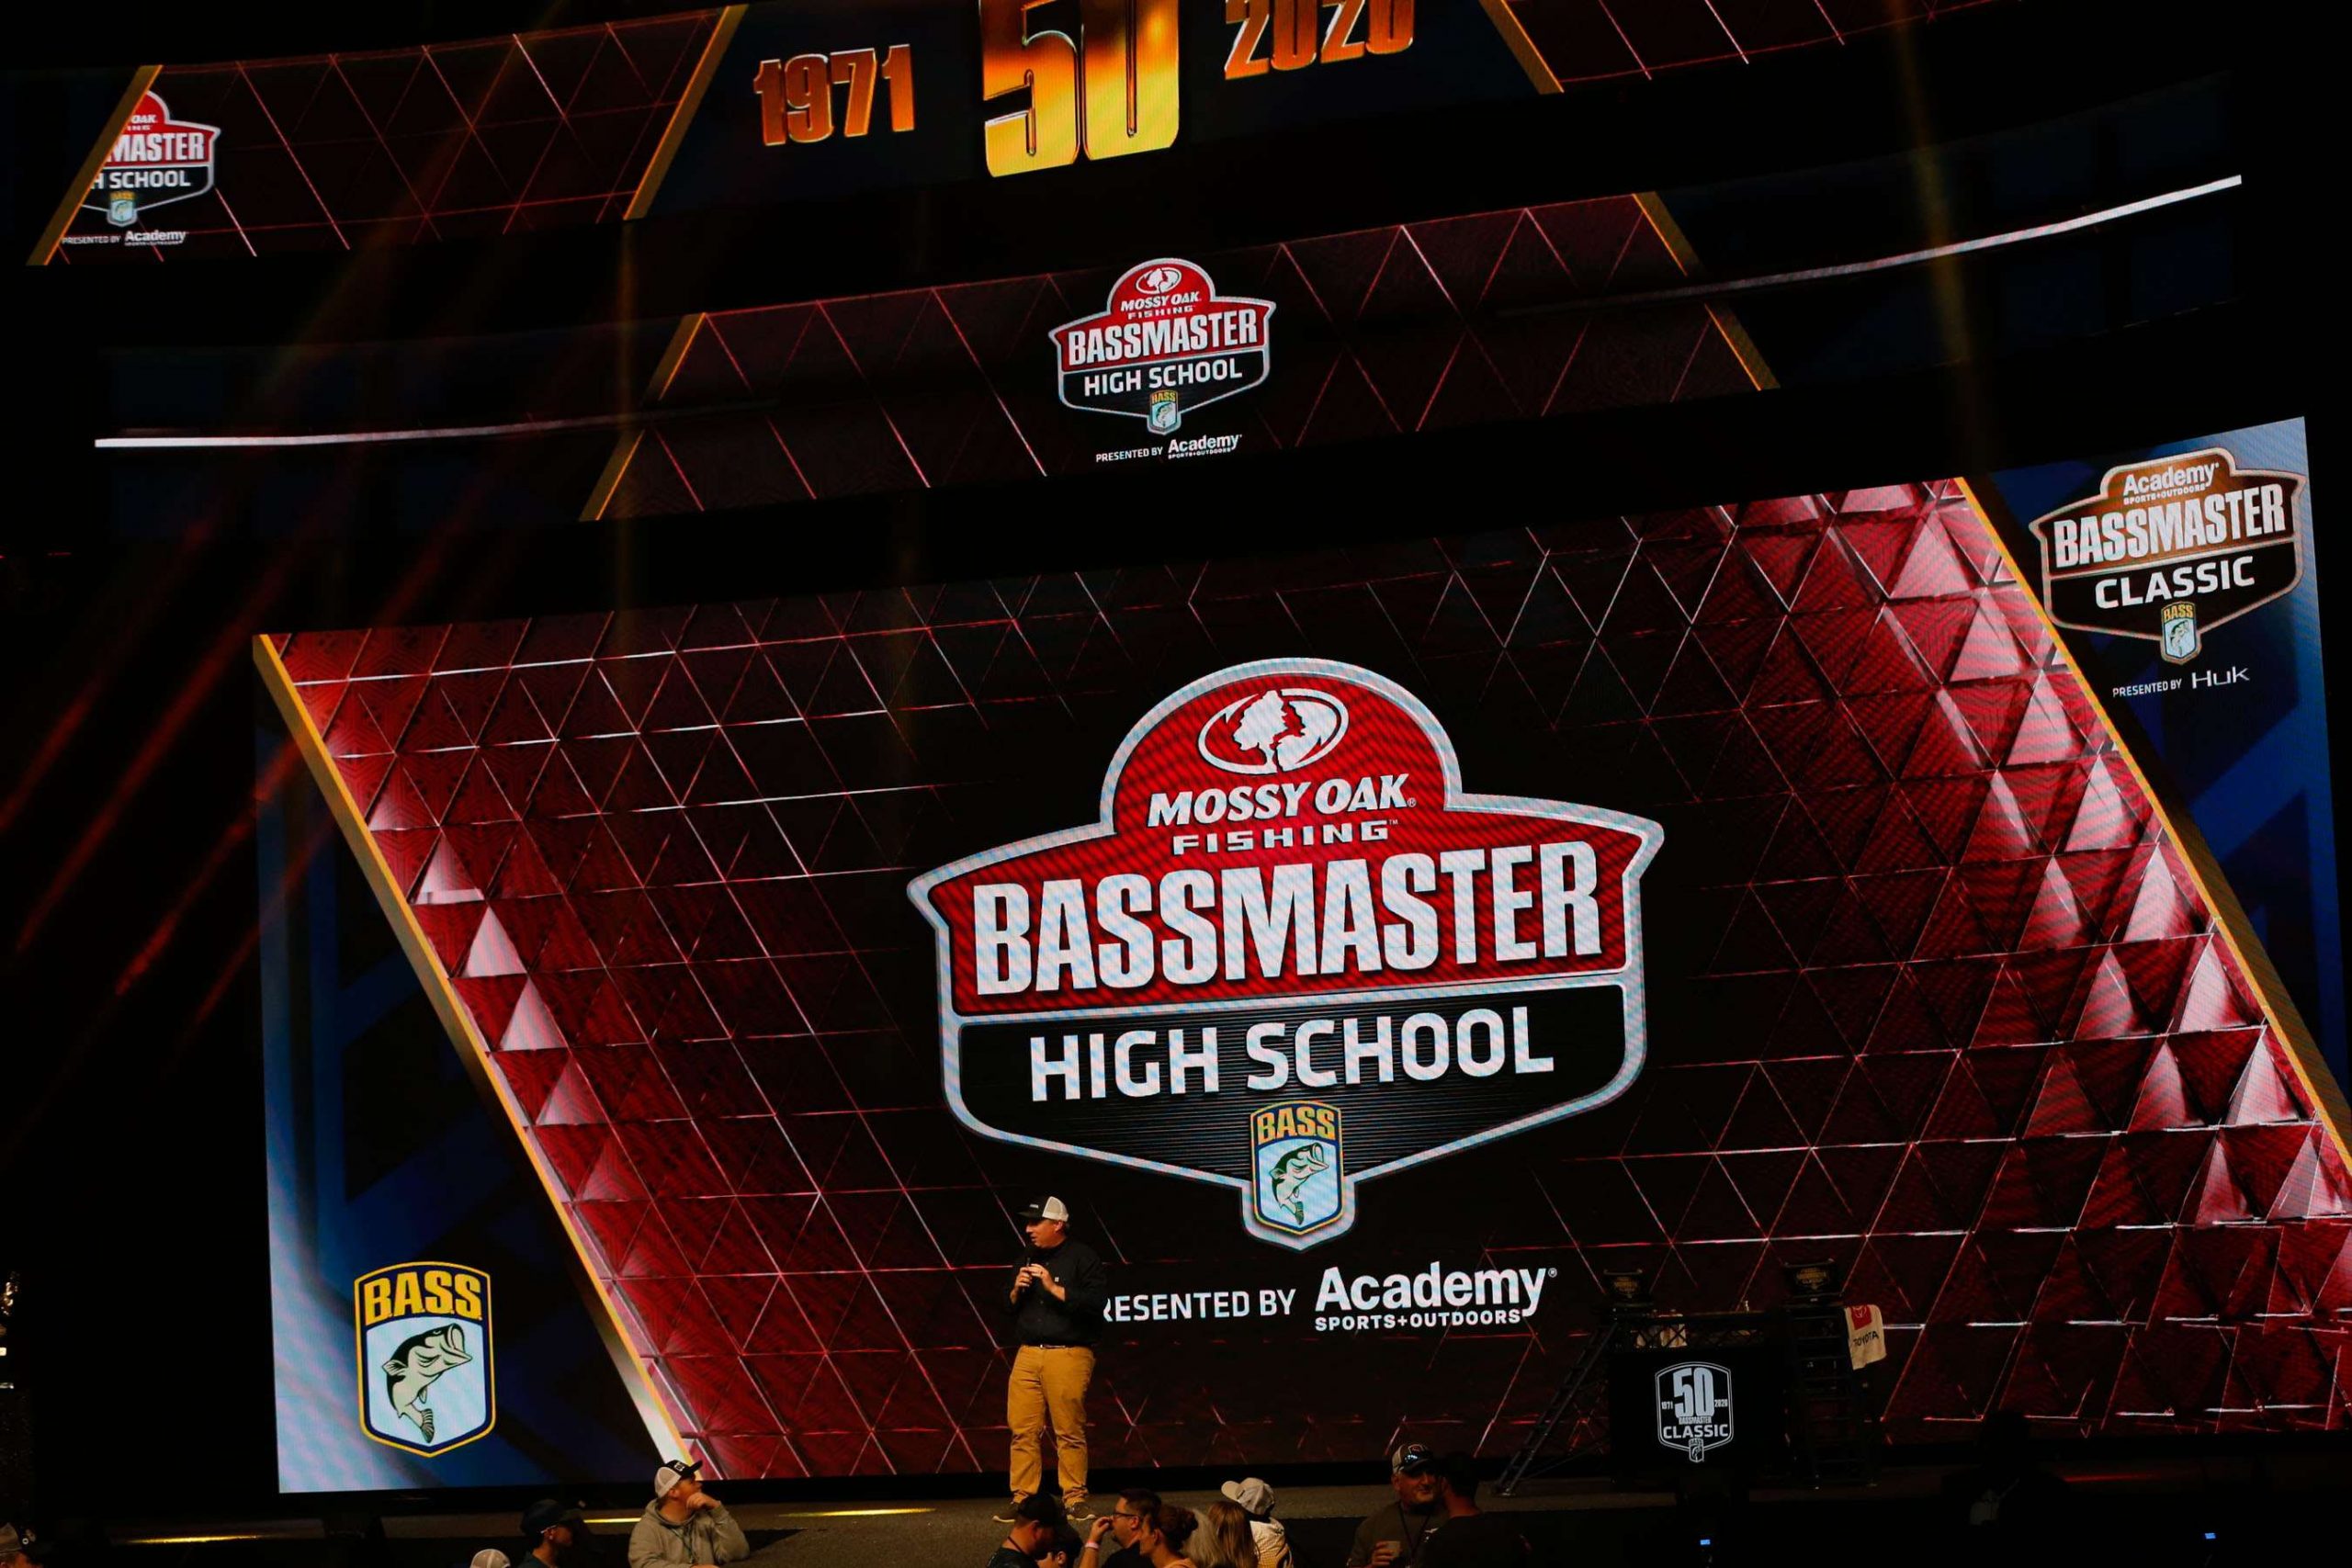 High school teams weigh in at the 2020 Academy Sports + Outdoors Bassmaster Classic presented by Huk!